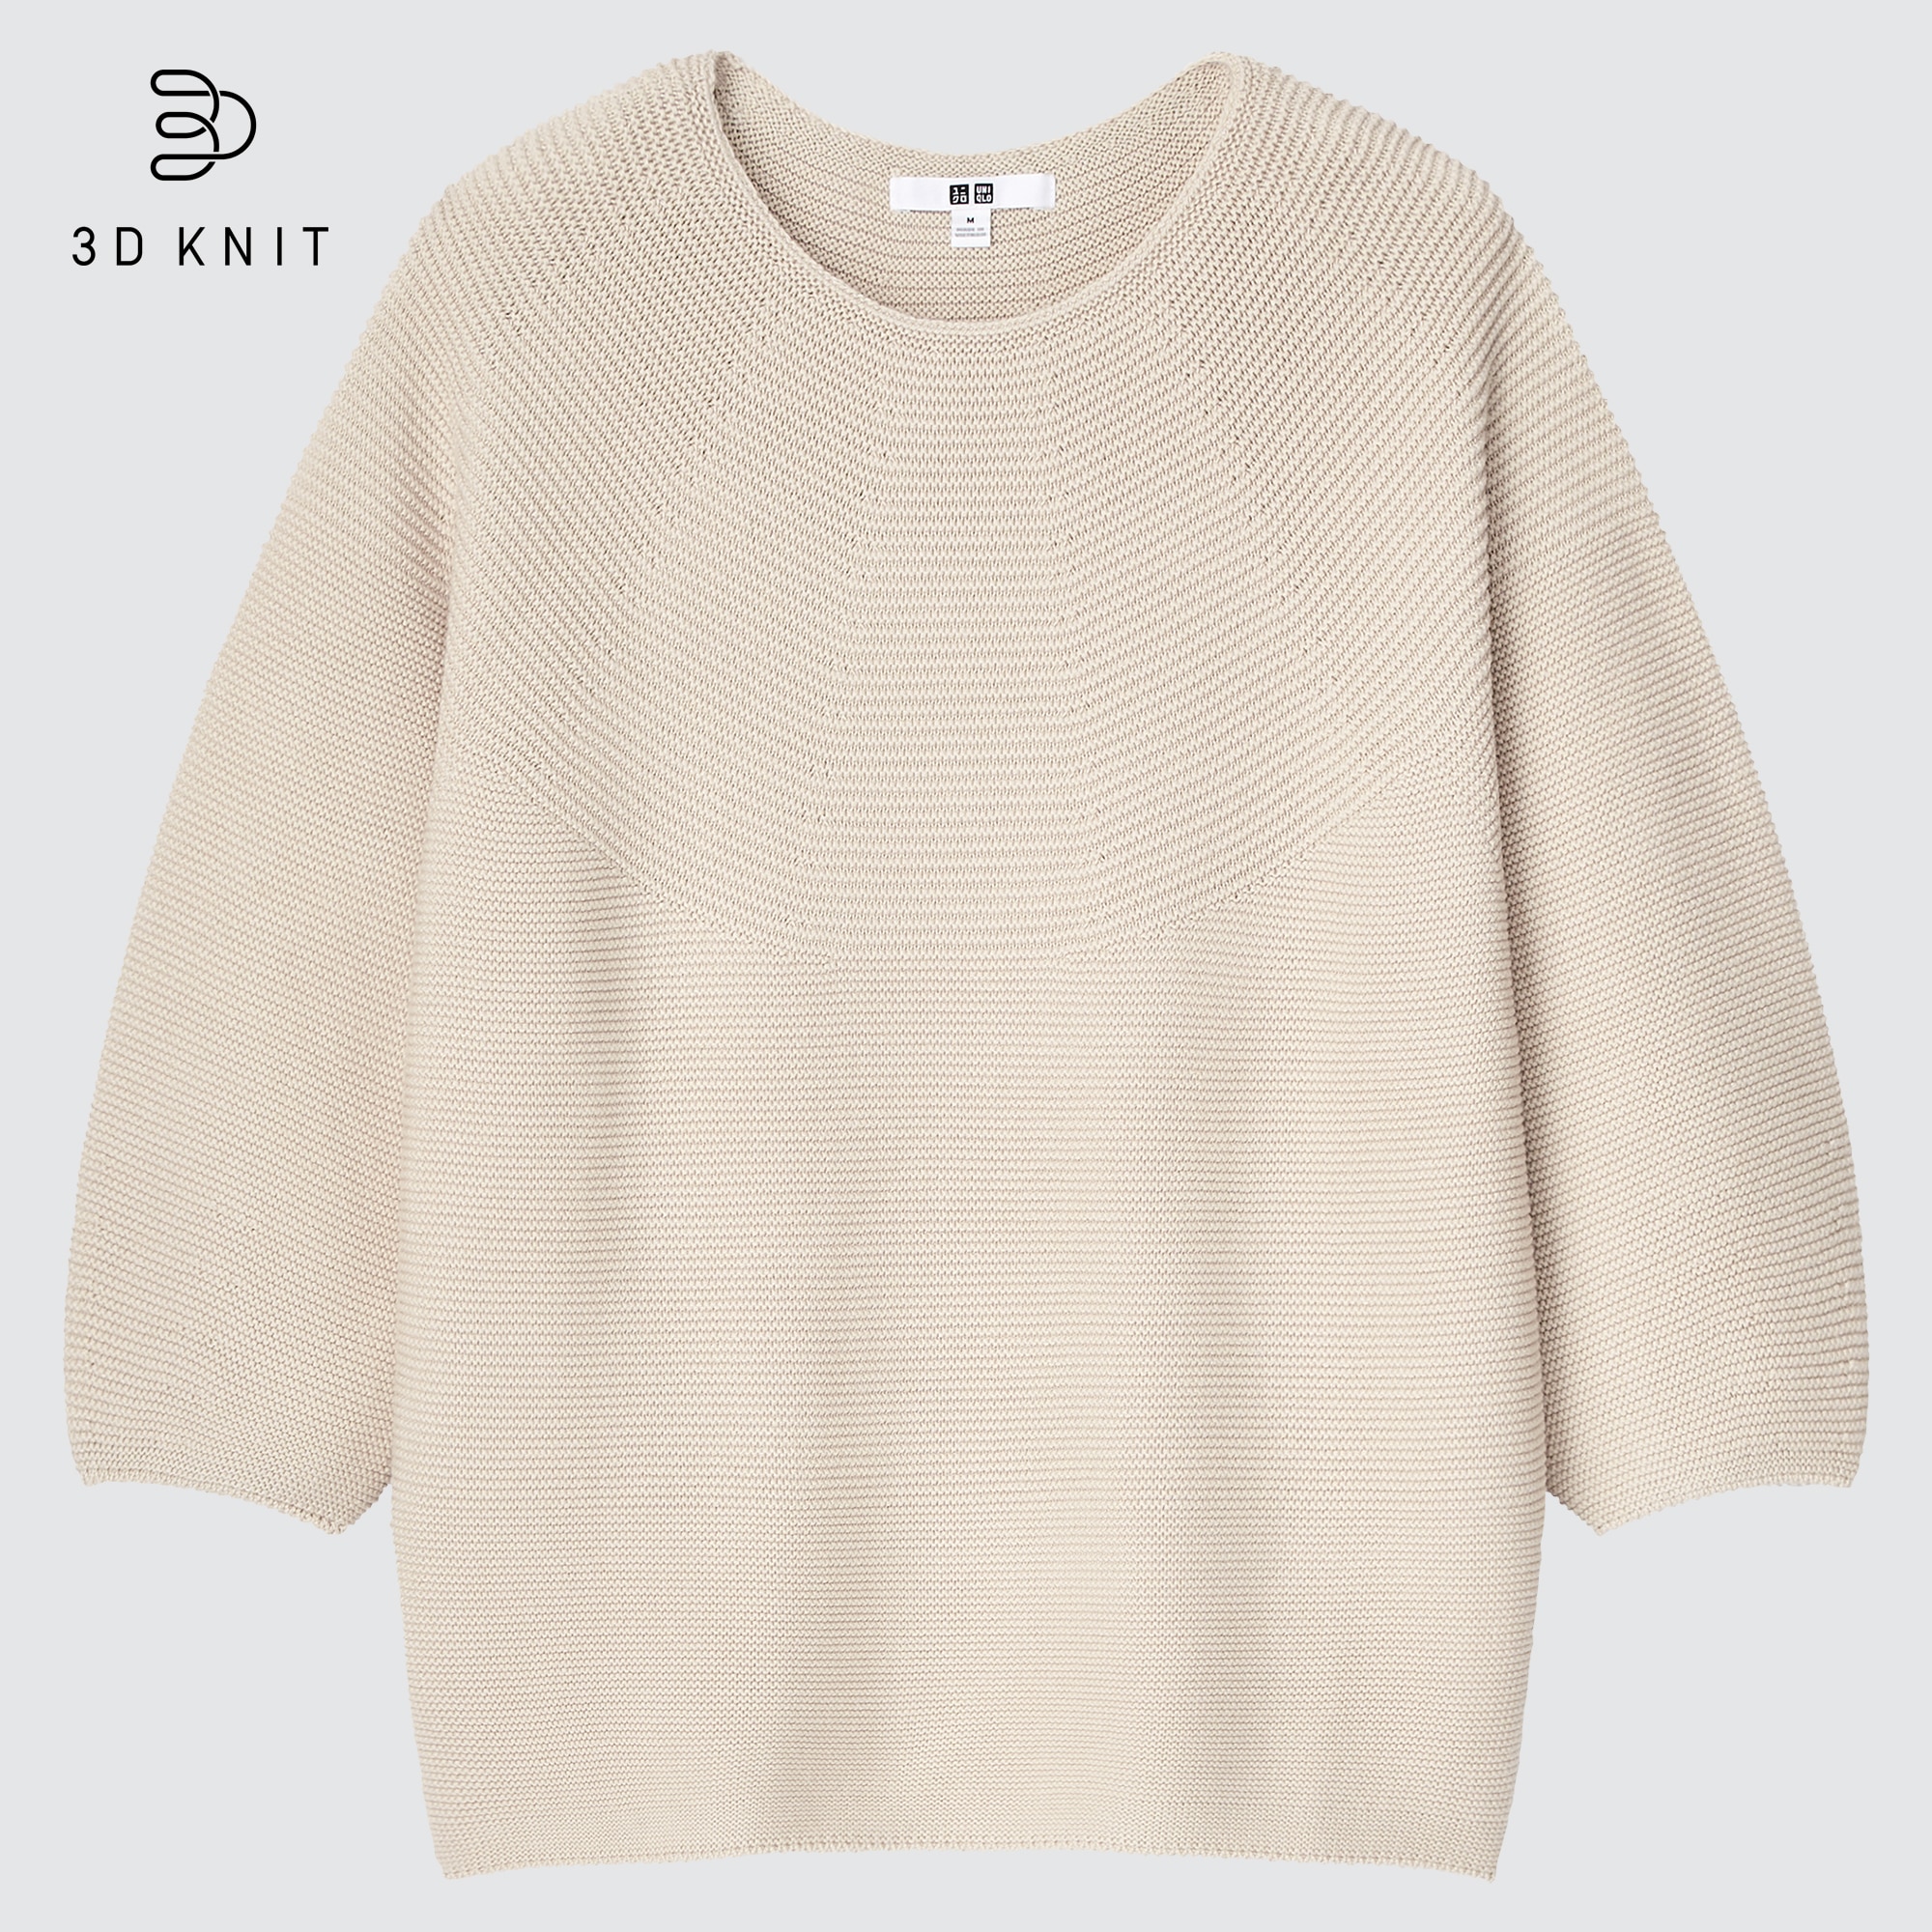 Check styling ideas for「3D KNIT COTTON VOLUME 3/4 SLEEVE SWEATER